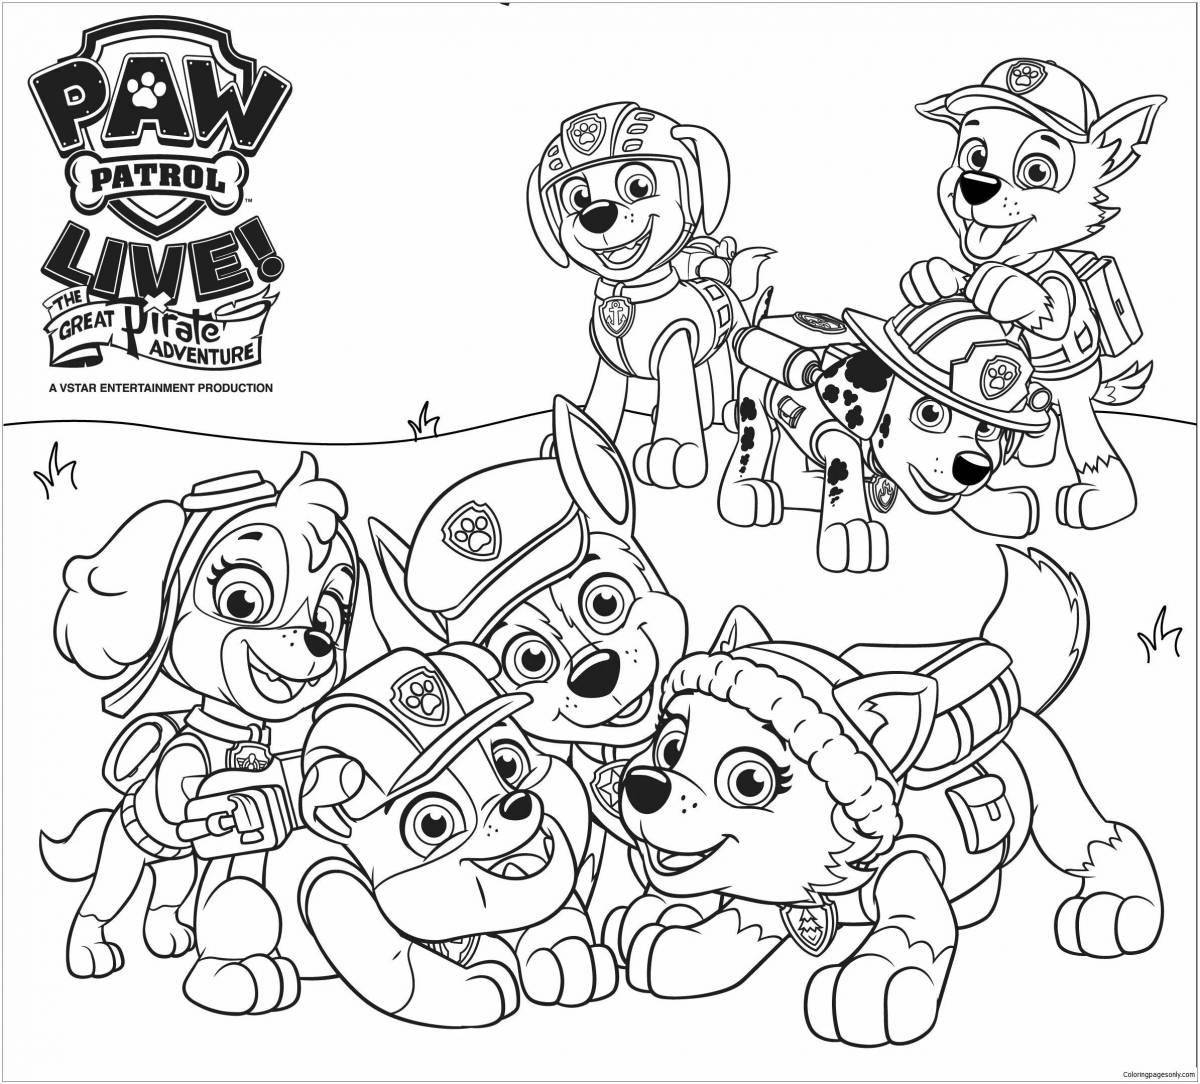 Paw Patrol live coloring page